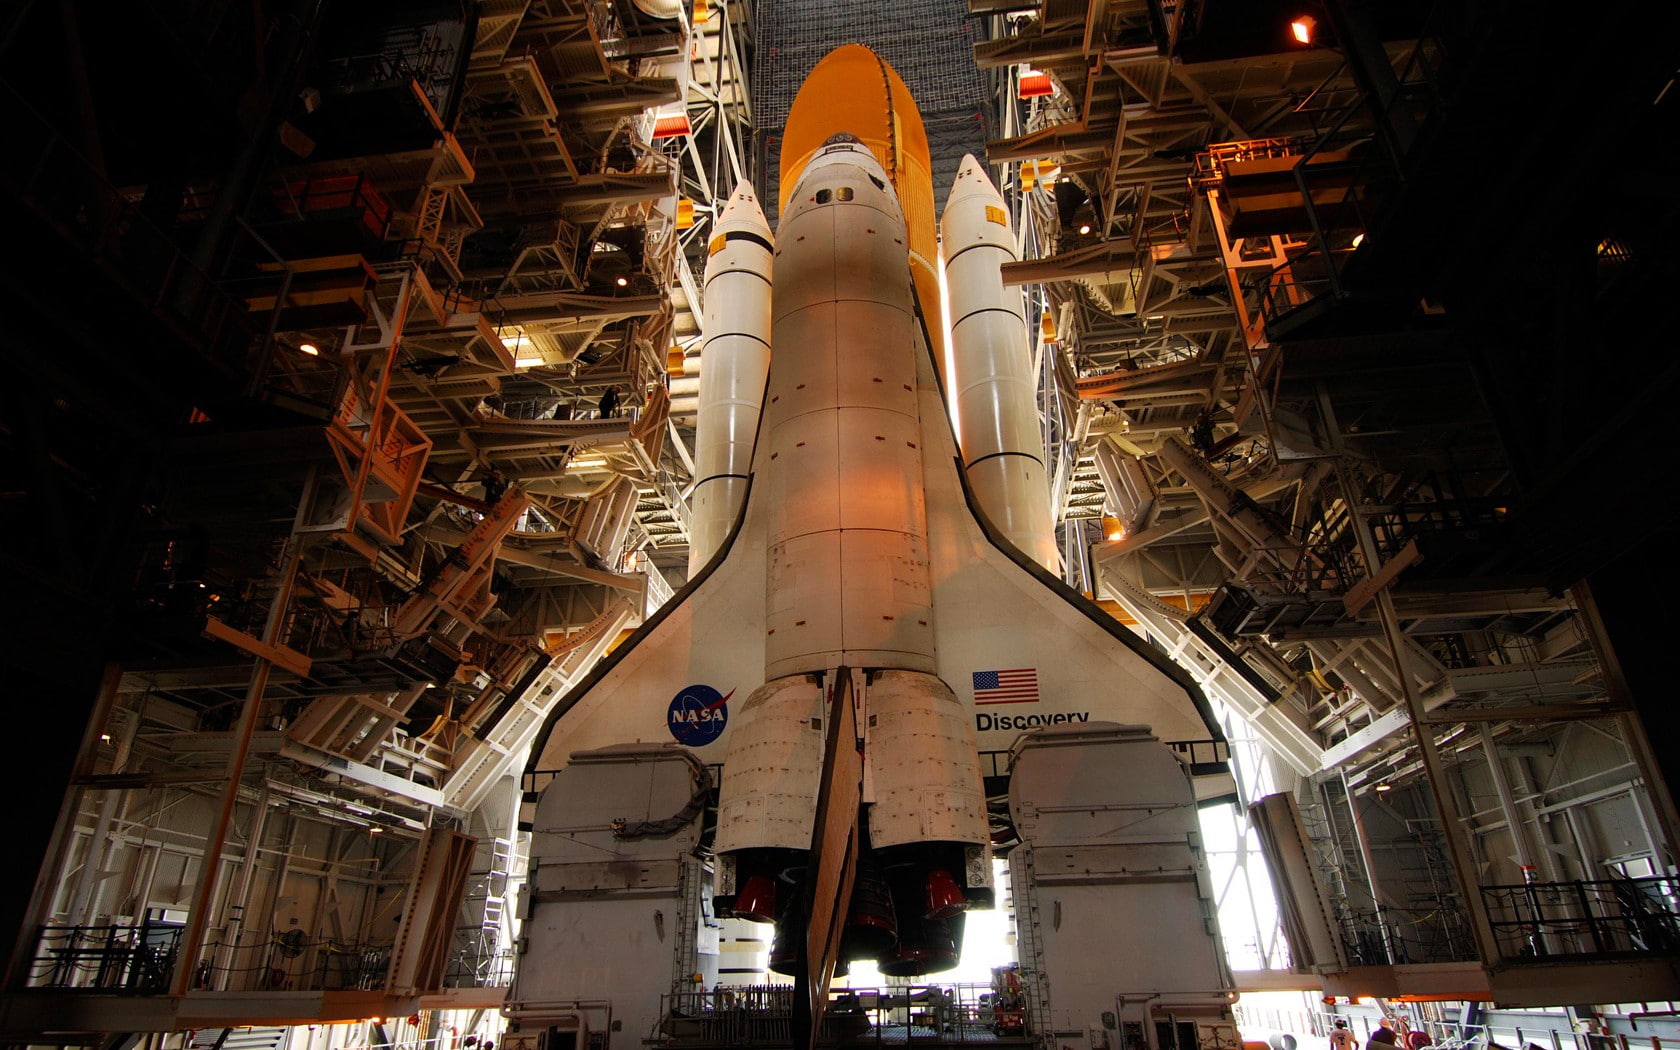 space shuttle, Discovery, NASA